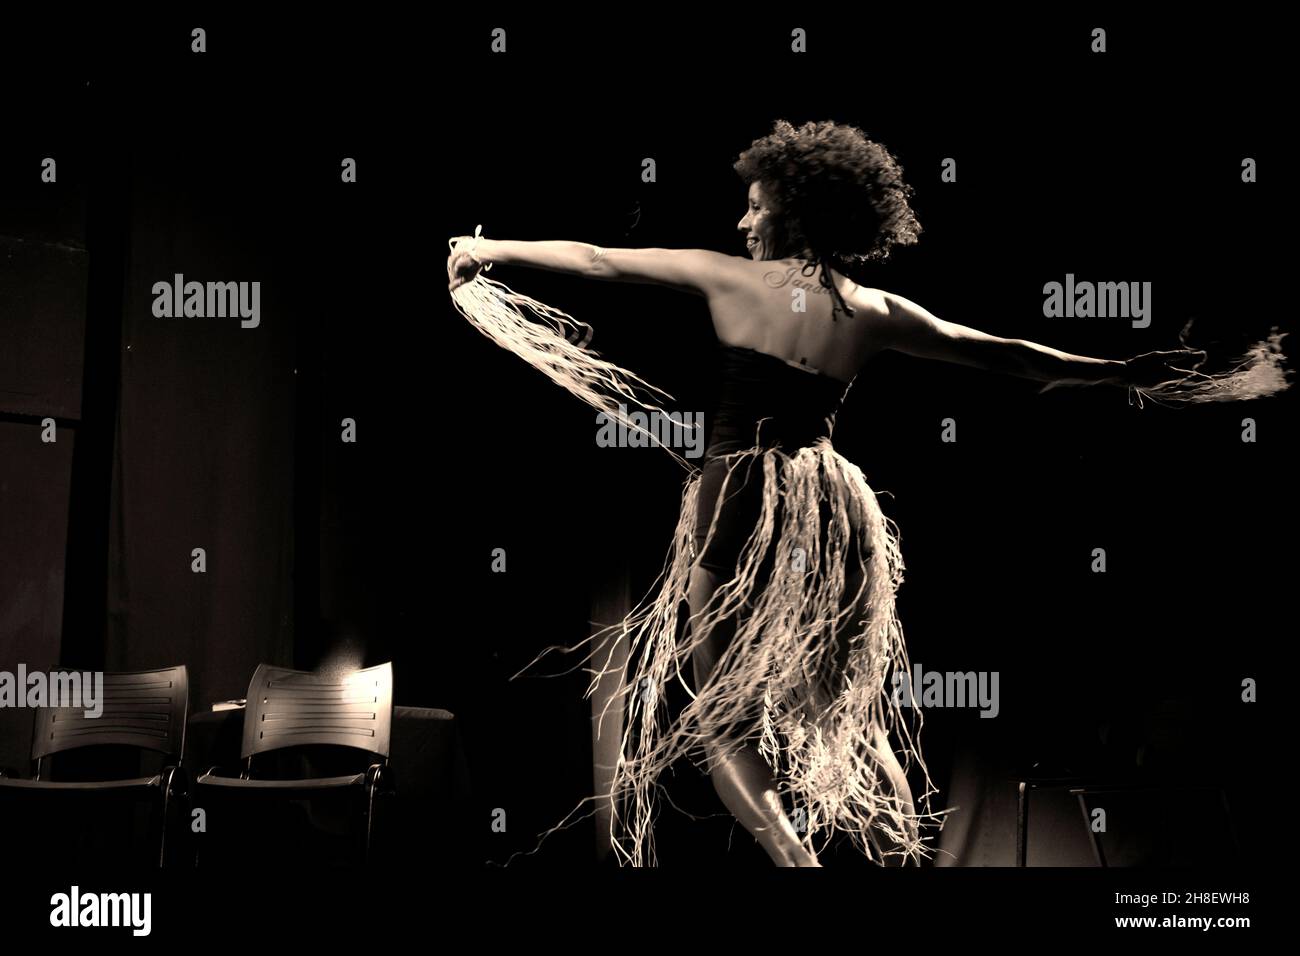 Portrait of a woman dancing on stage against black background. Salvador, Bahia, Brazil. Stock Photo